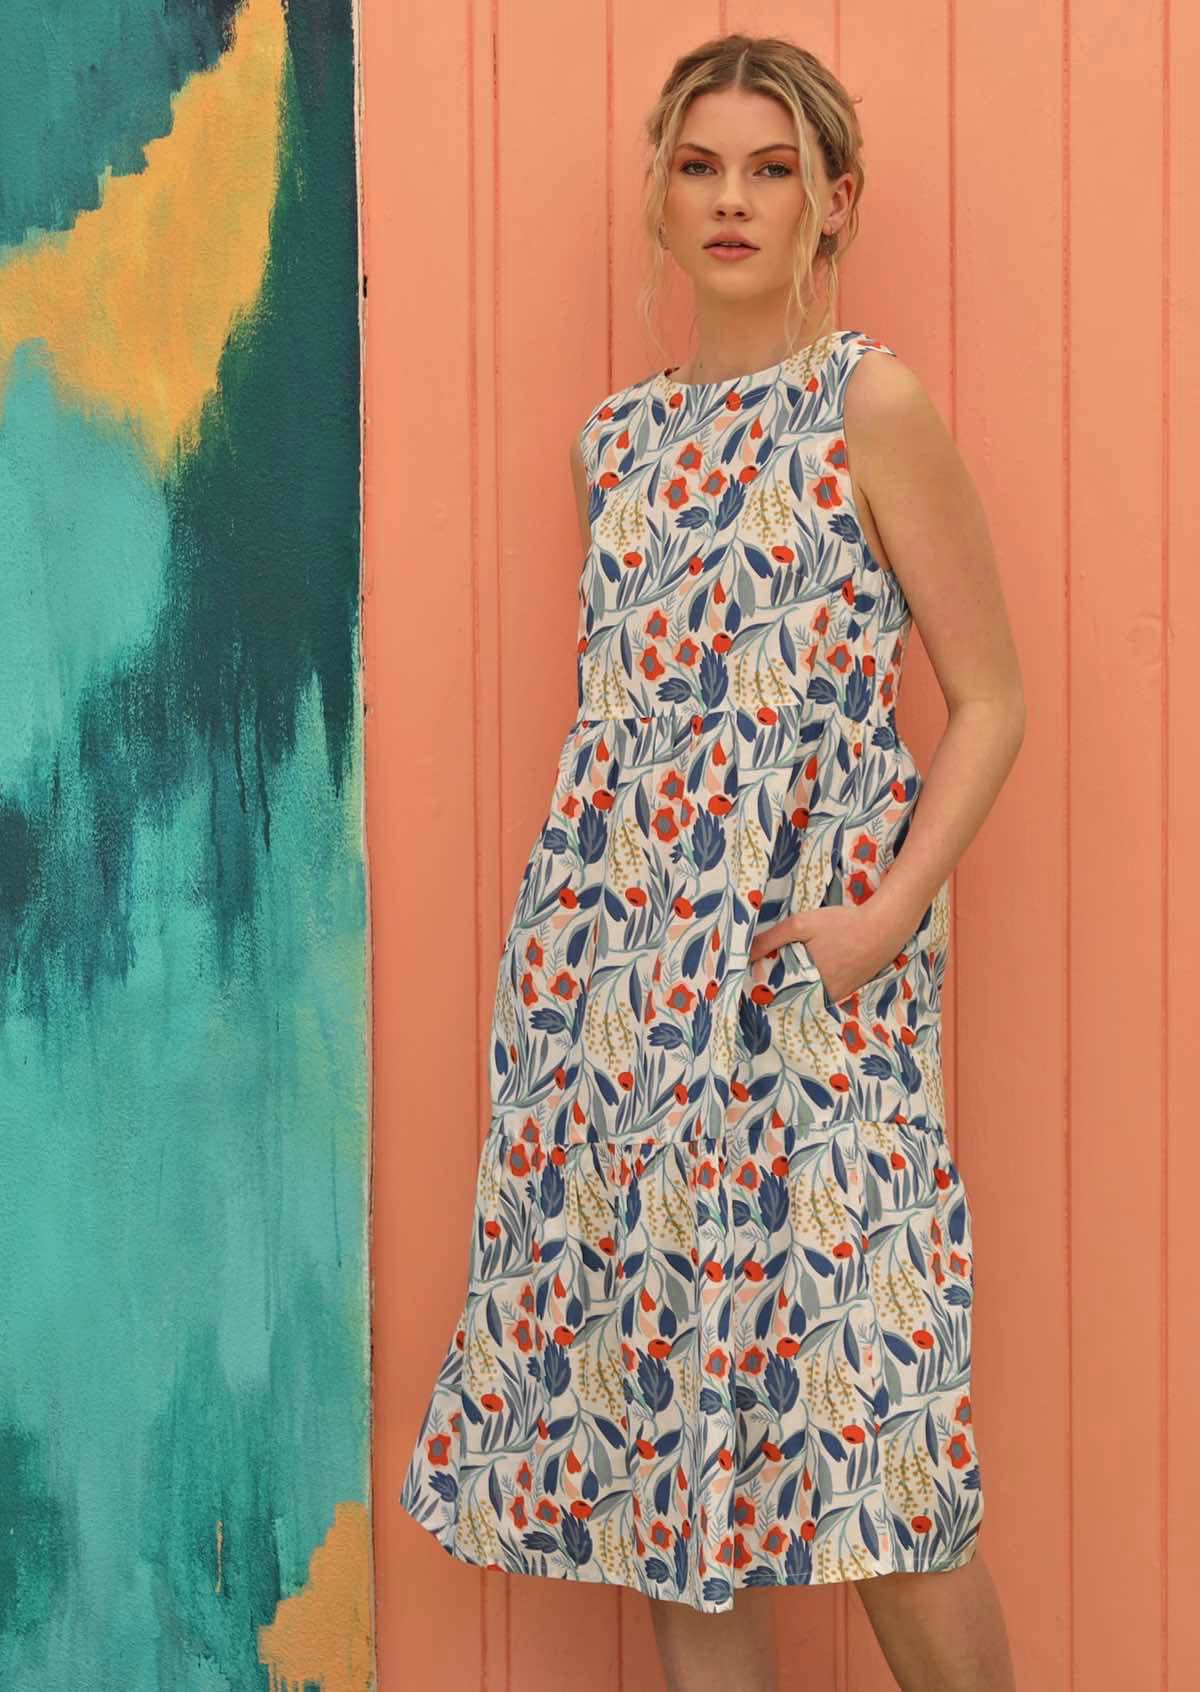 Blonde woman has her hands in the pockets of her relaxed fit, floral dress. 